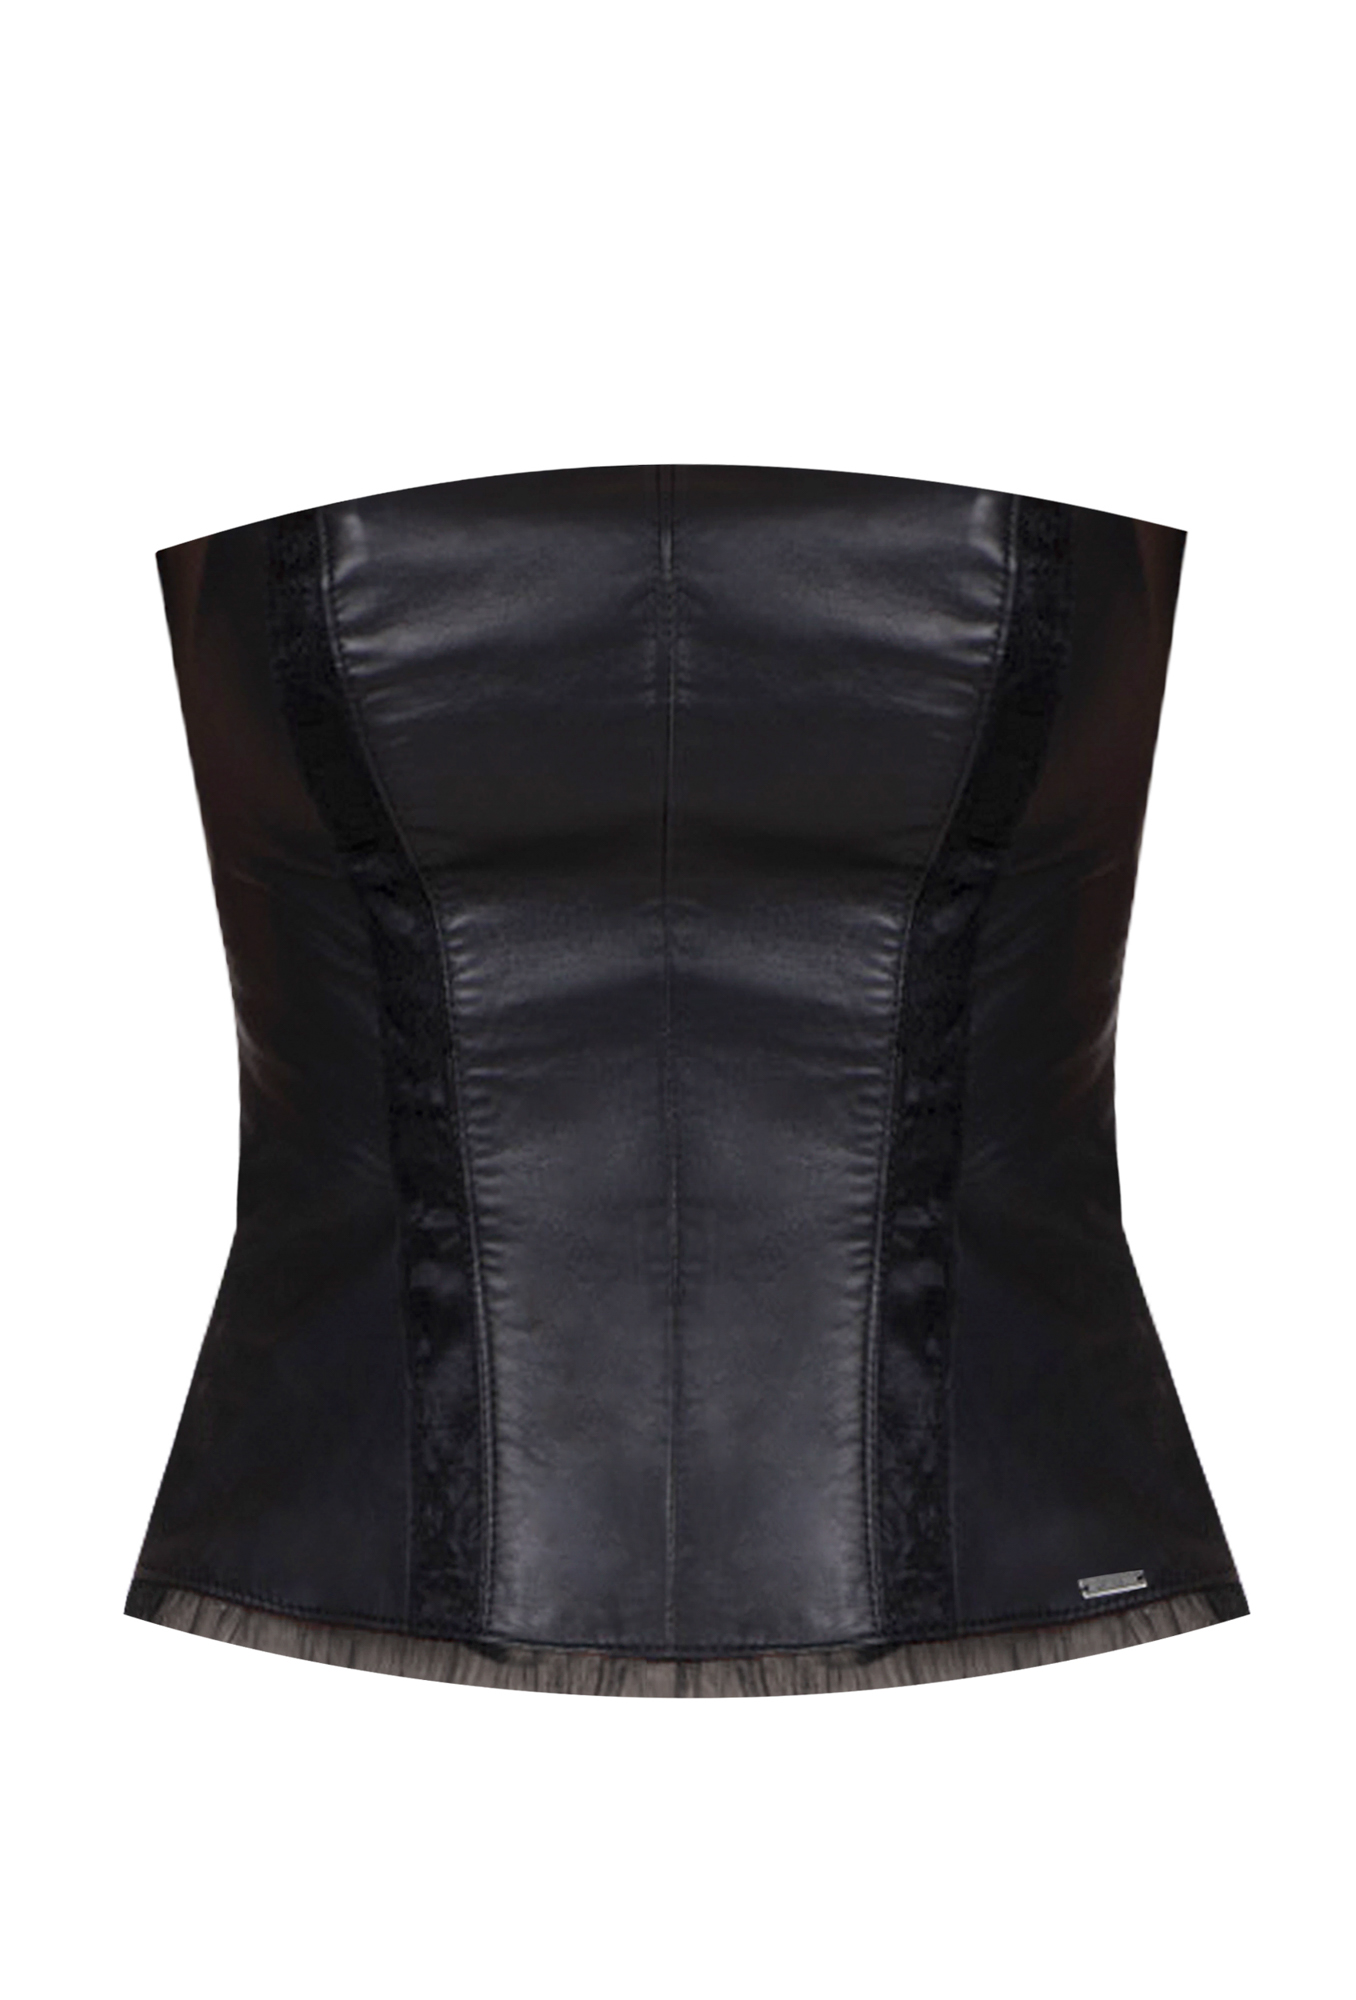 219002 LEATHER CORSET BLACK - By Rieske image 3